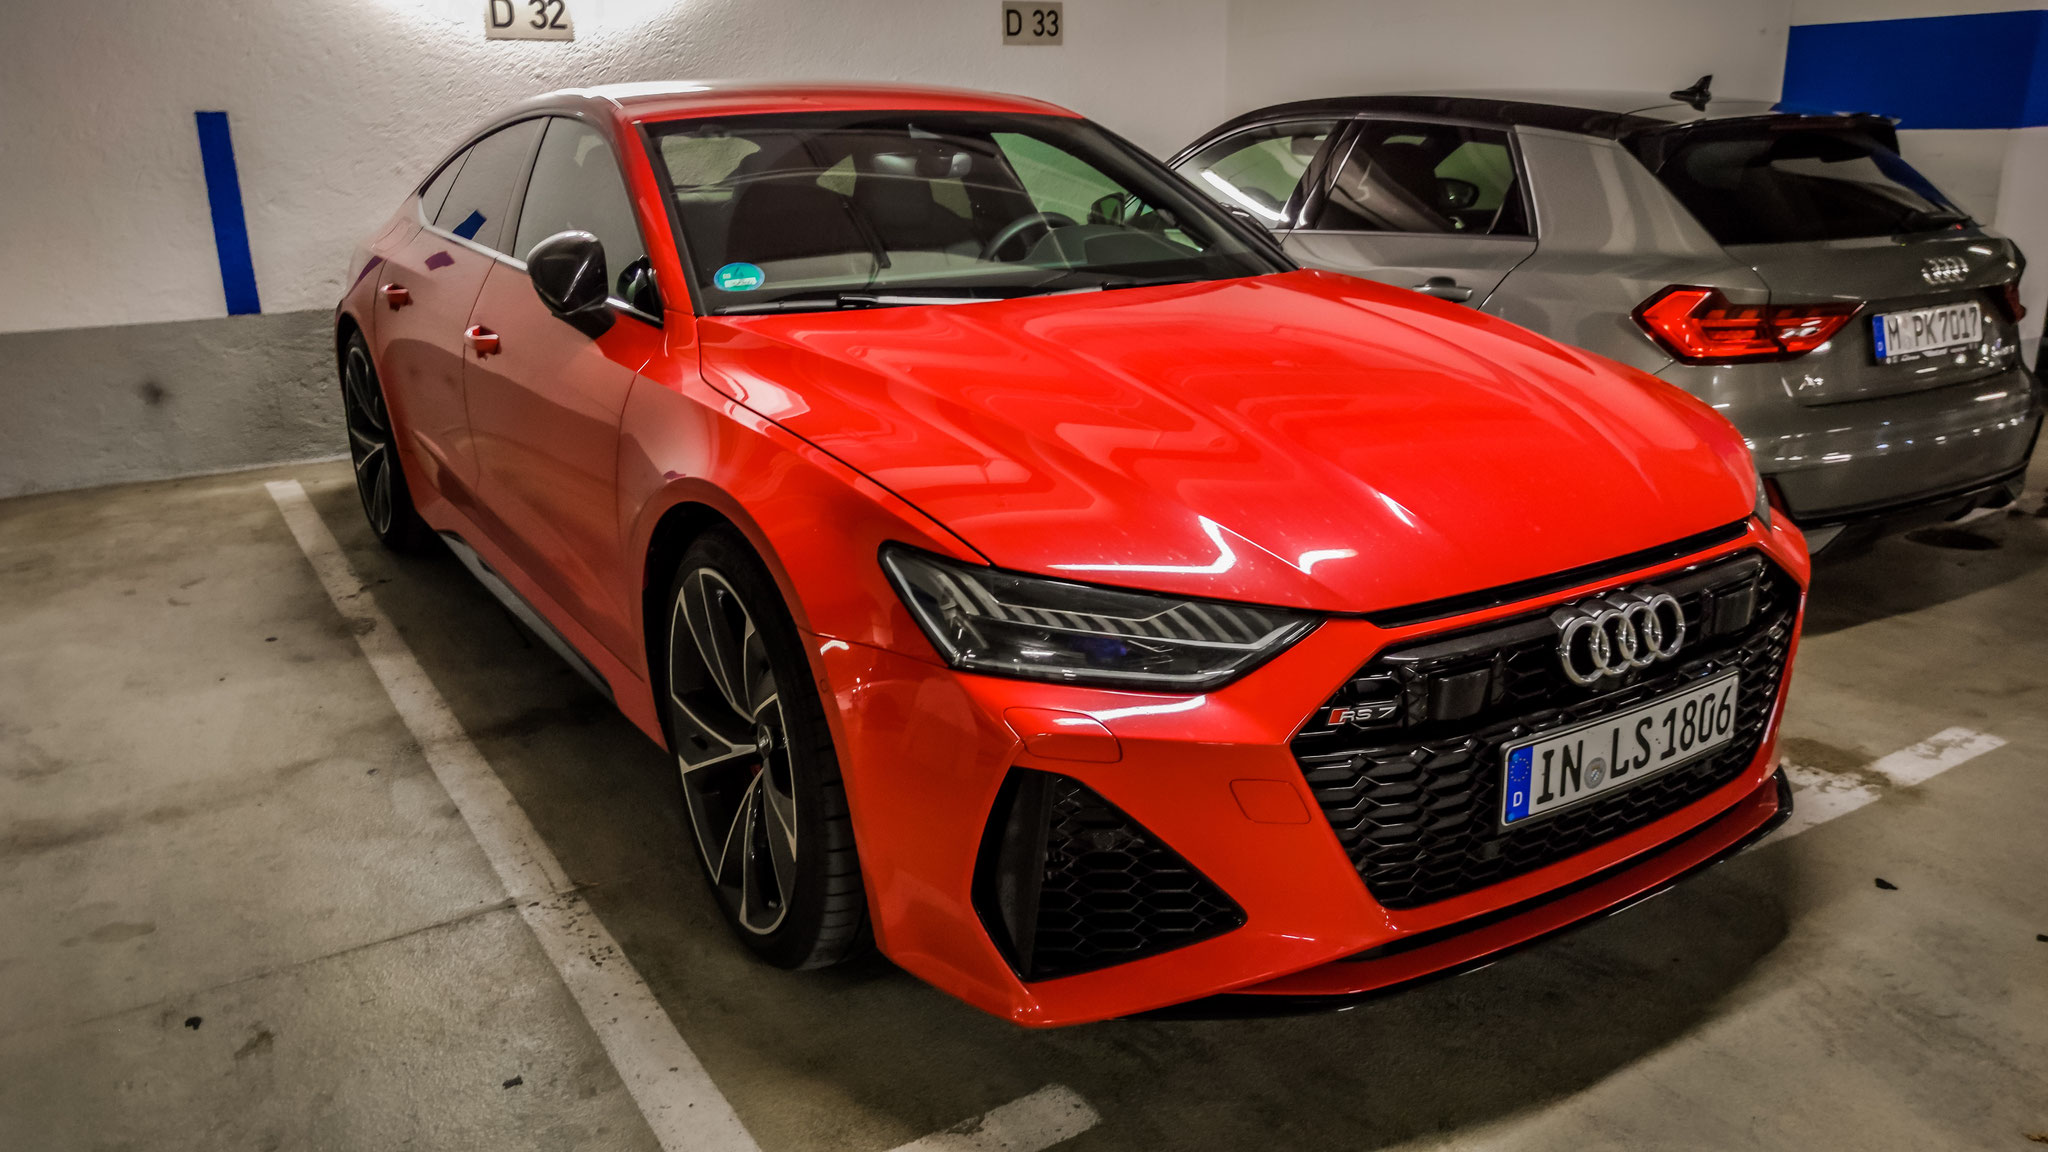 Audi RS7 - IN-LS-1806